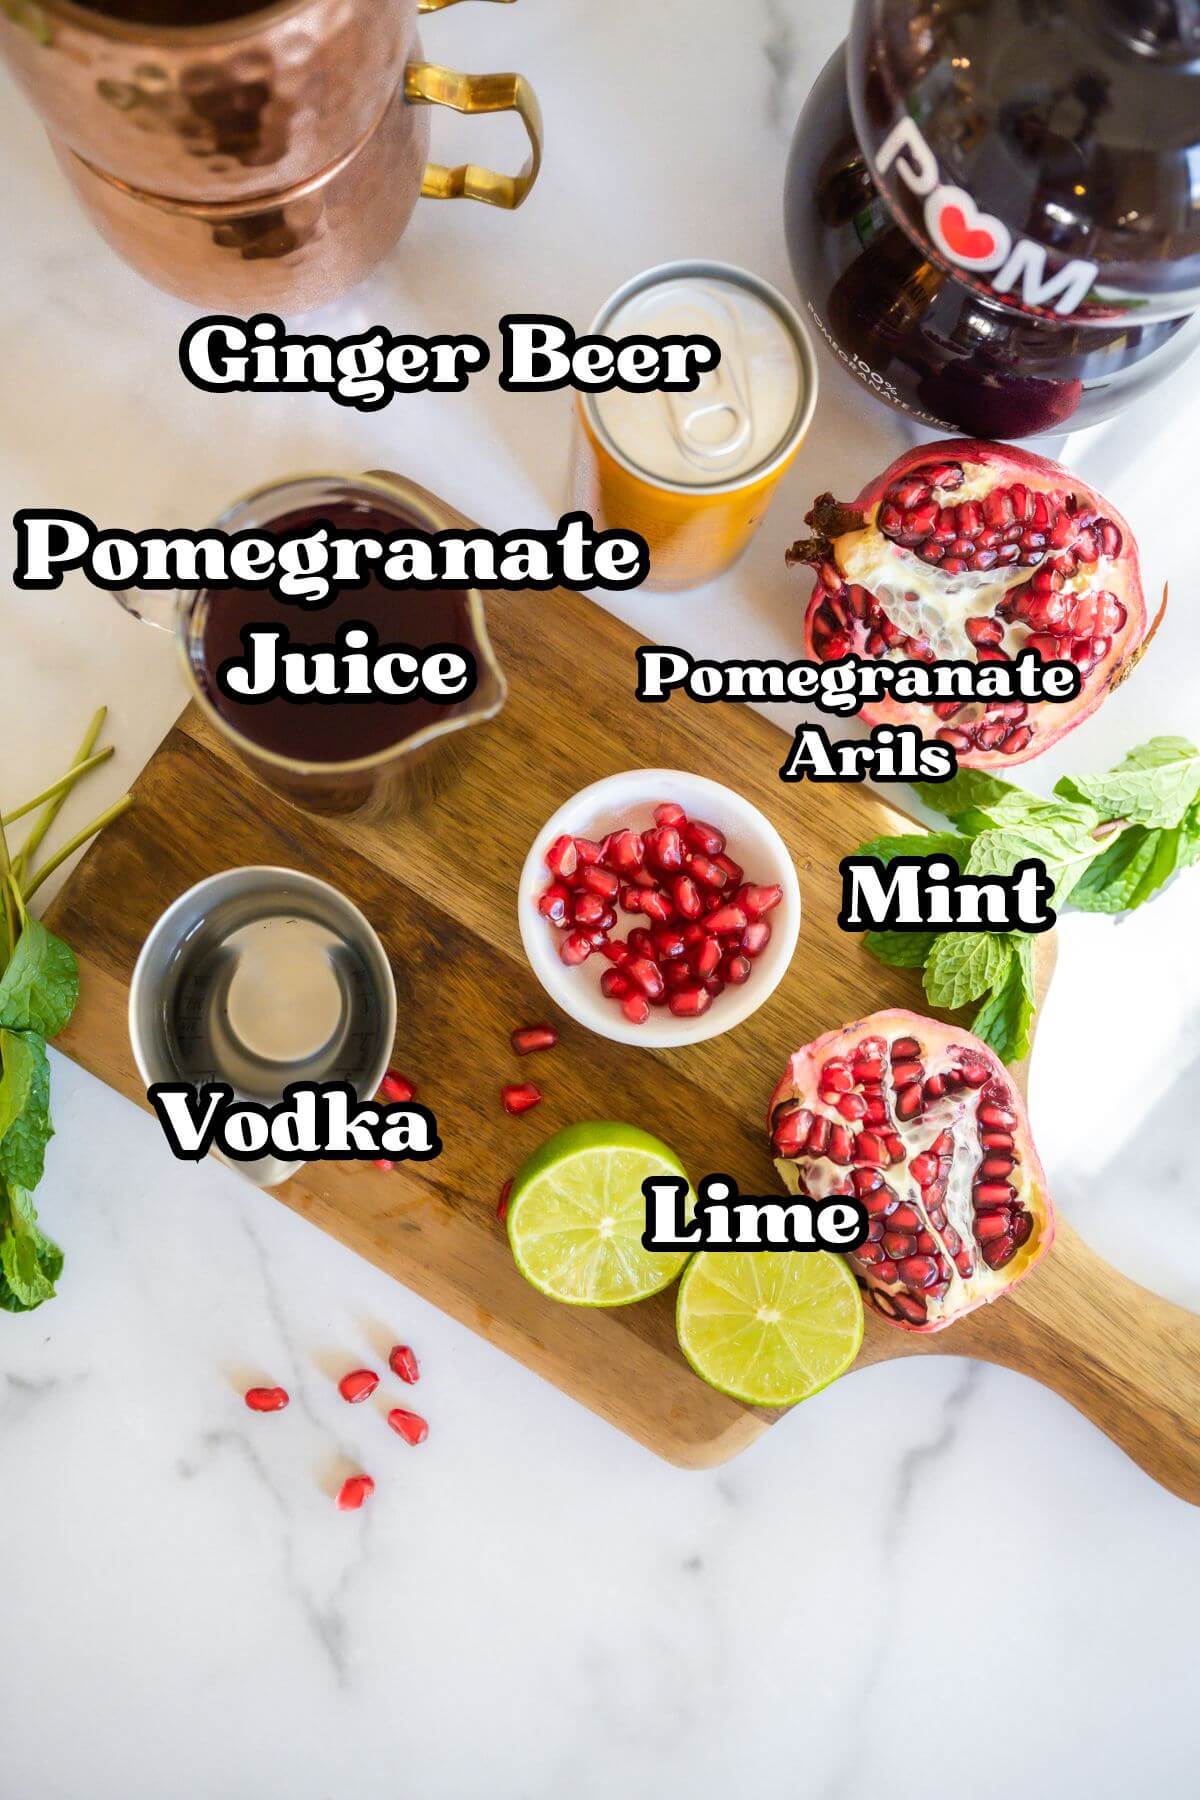 Labeled ingredients for pomegranate moscow mule.